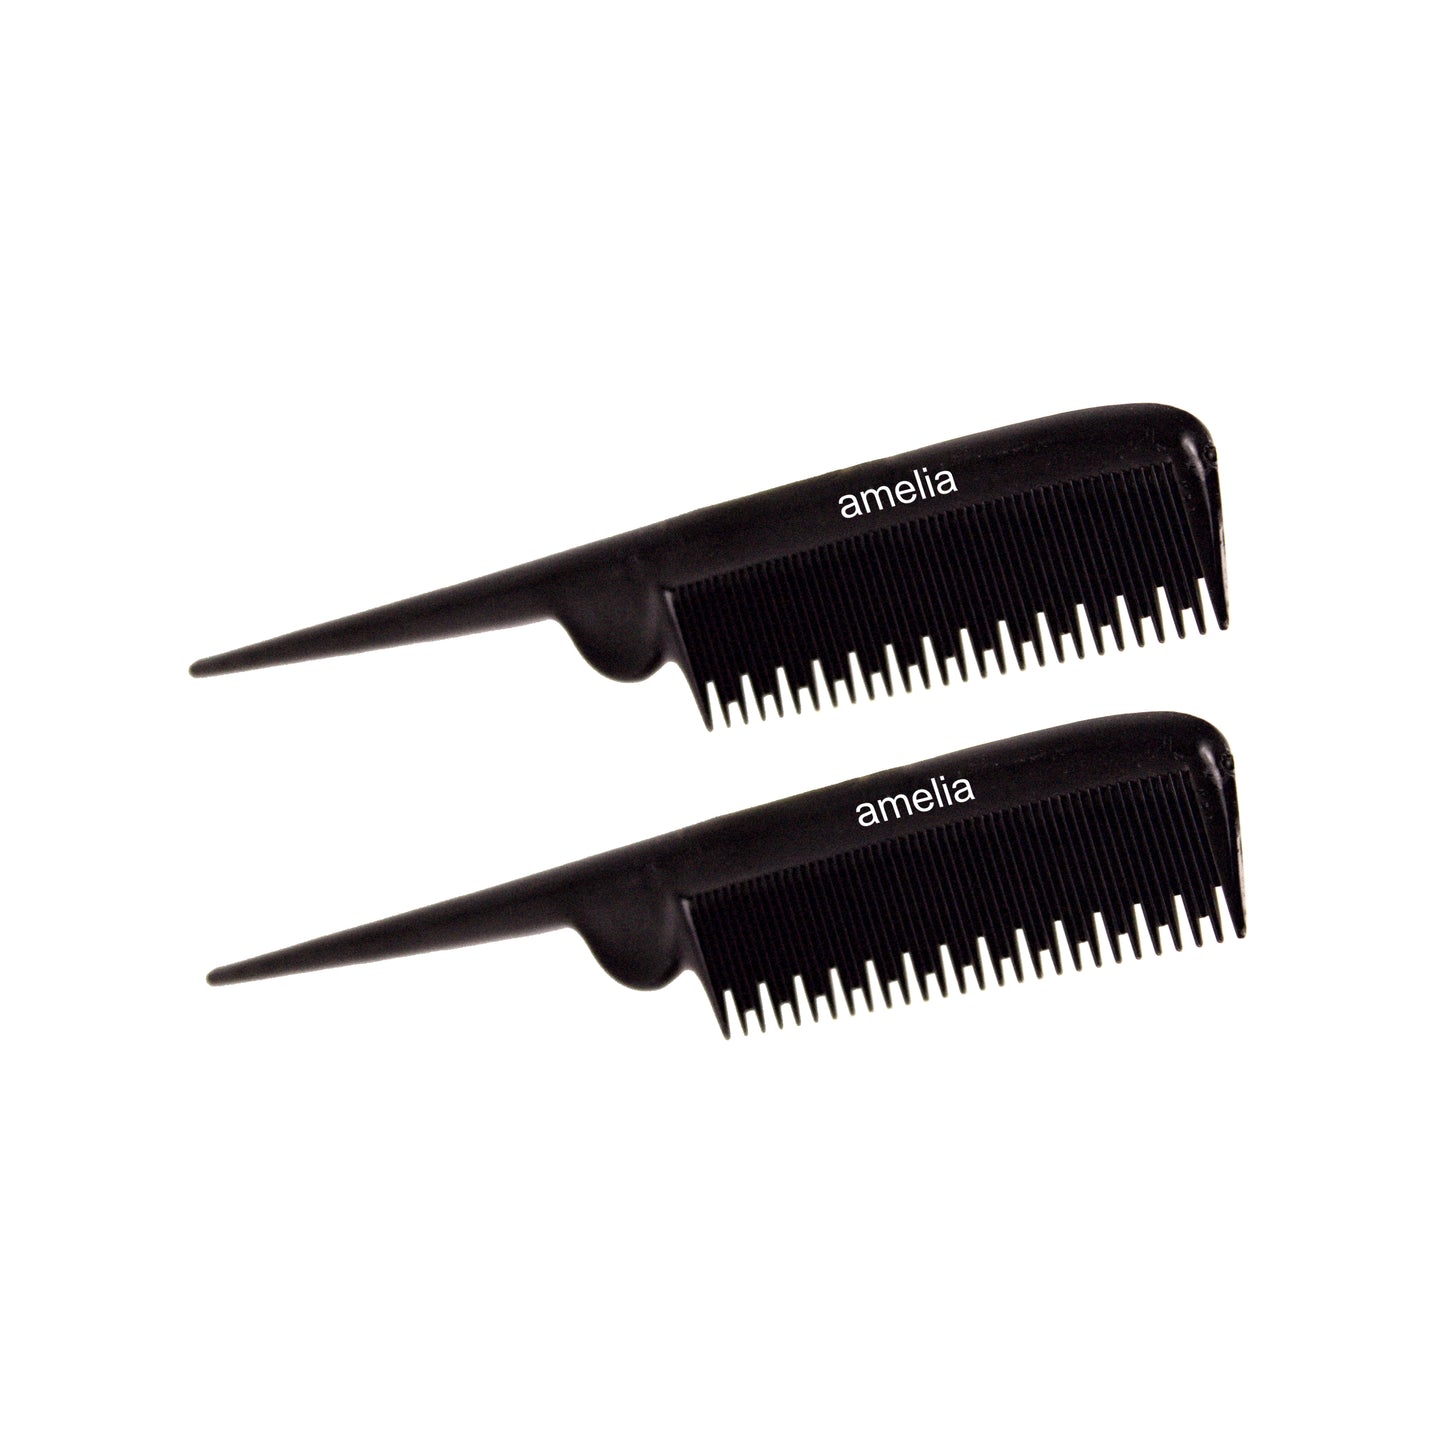 Amelia Beauty, 8.5in Black Plastic Pin Rat Tail Tease Comb, Made in USA, Professional Grade Hair Comb, Highlighting, Sectioning, Styling, Teasing Hair with Long Tail Tip, Wet or Dry, 8.5"x1", 2 Pack